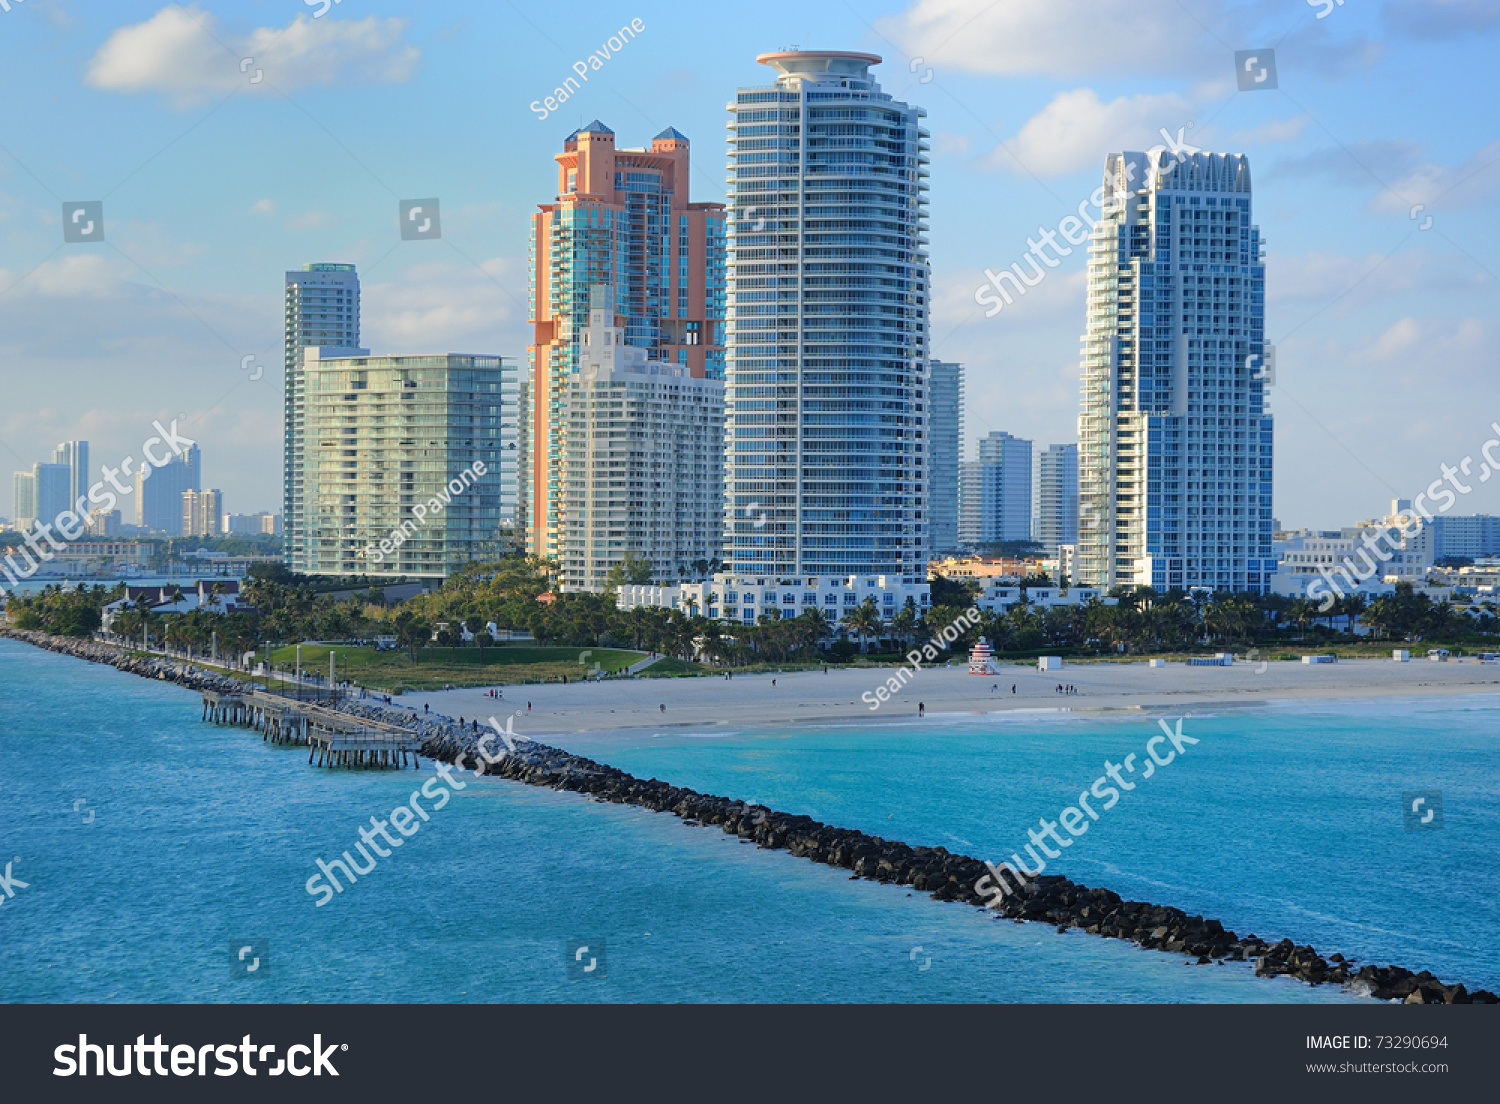 stock-photo-skyline-of-luxury-high-rise-apartments-on-south-beach-in-miami-florida-73290694.jpg